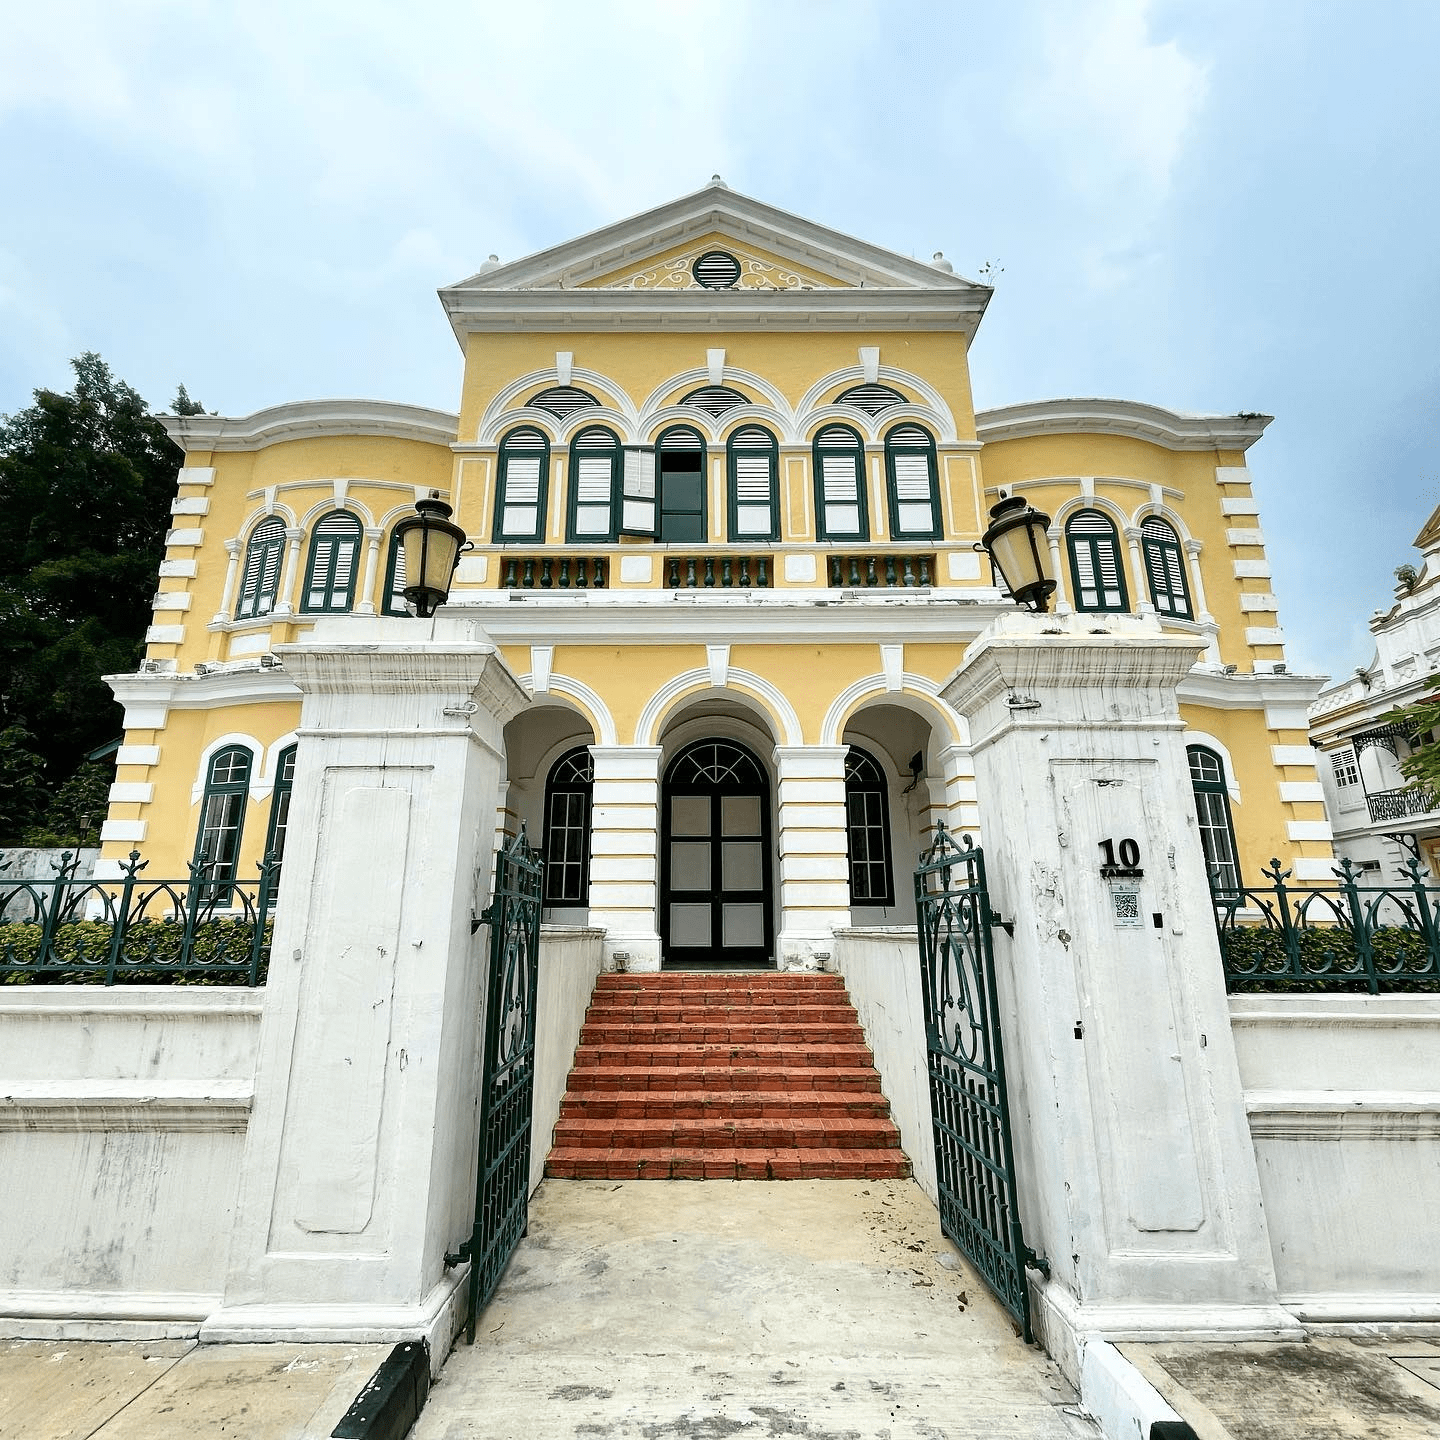 Heritage buildings in KL - Chow Kit Mansion